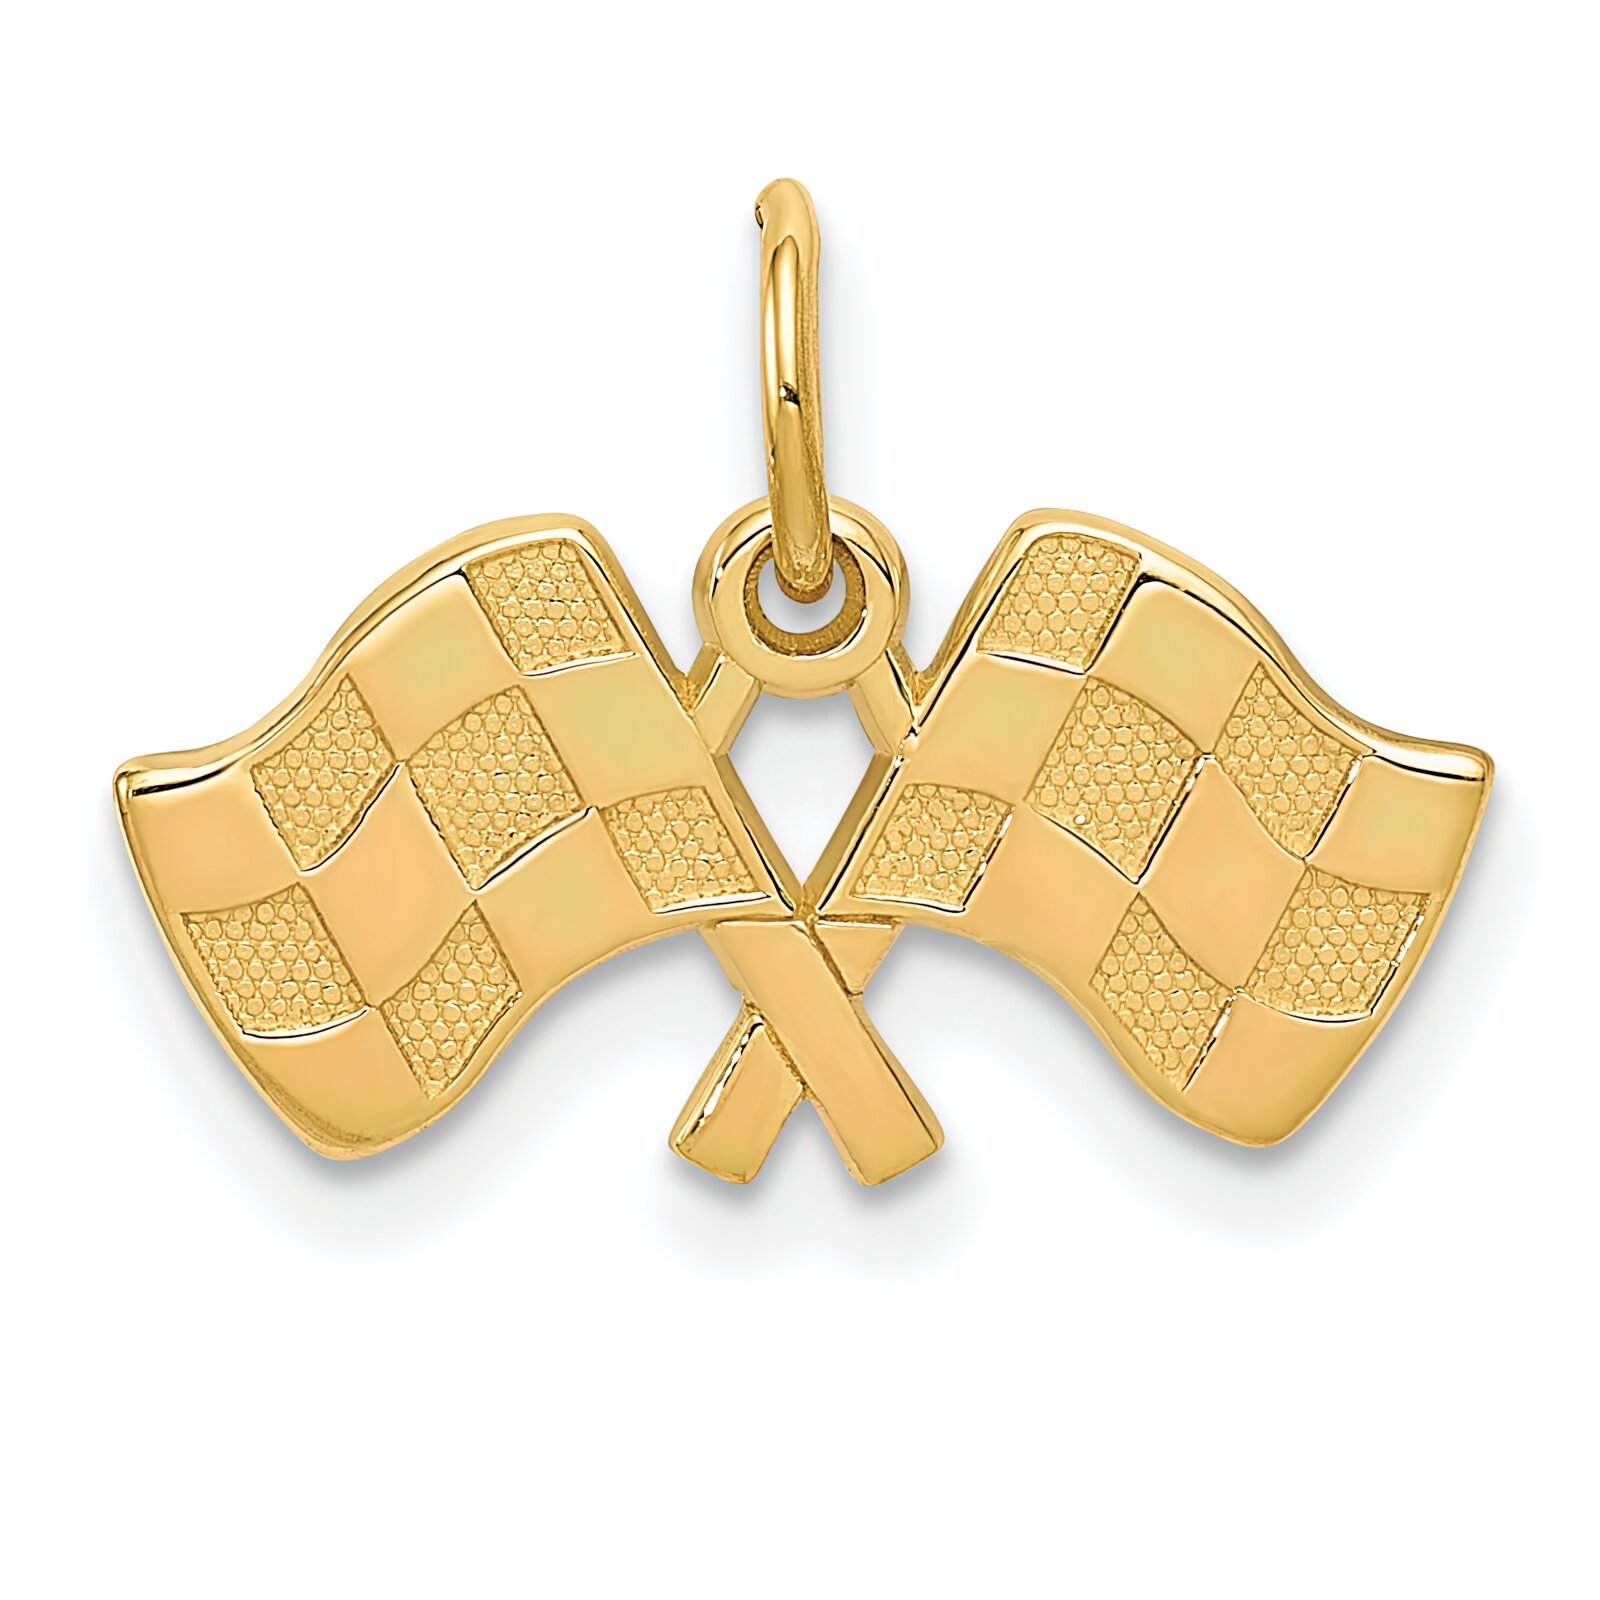 Findingking 14K Gold Racing Flags Charm